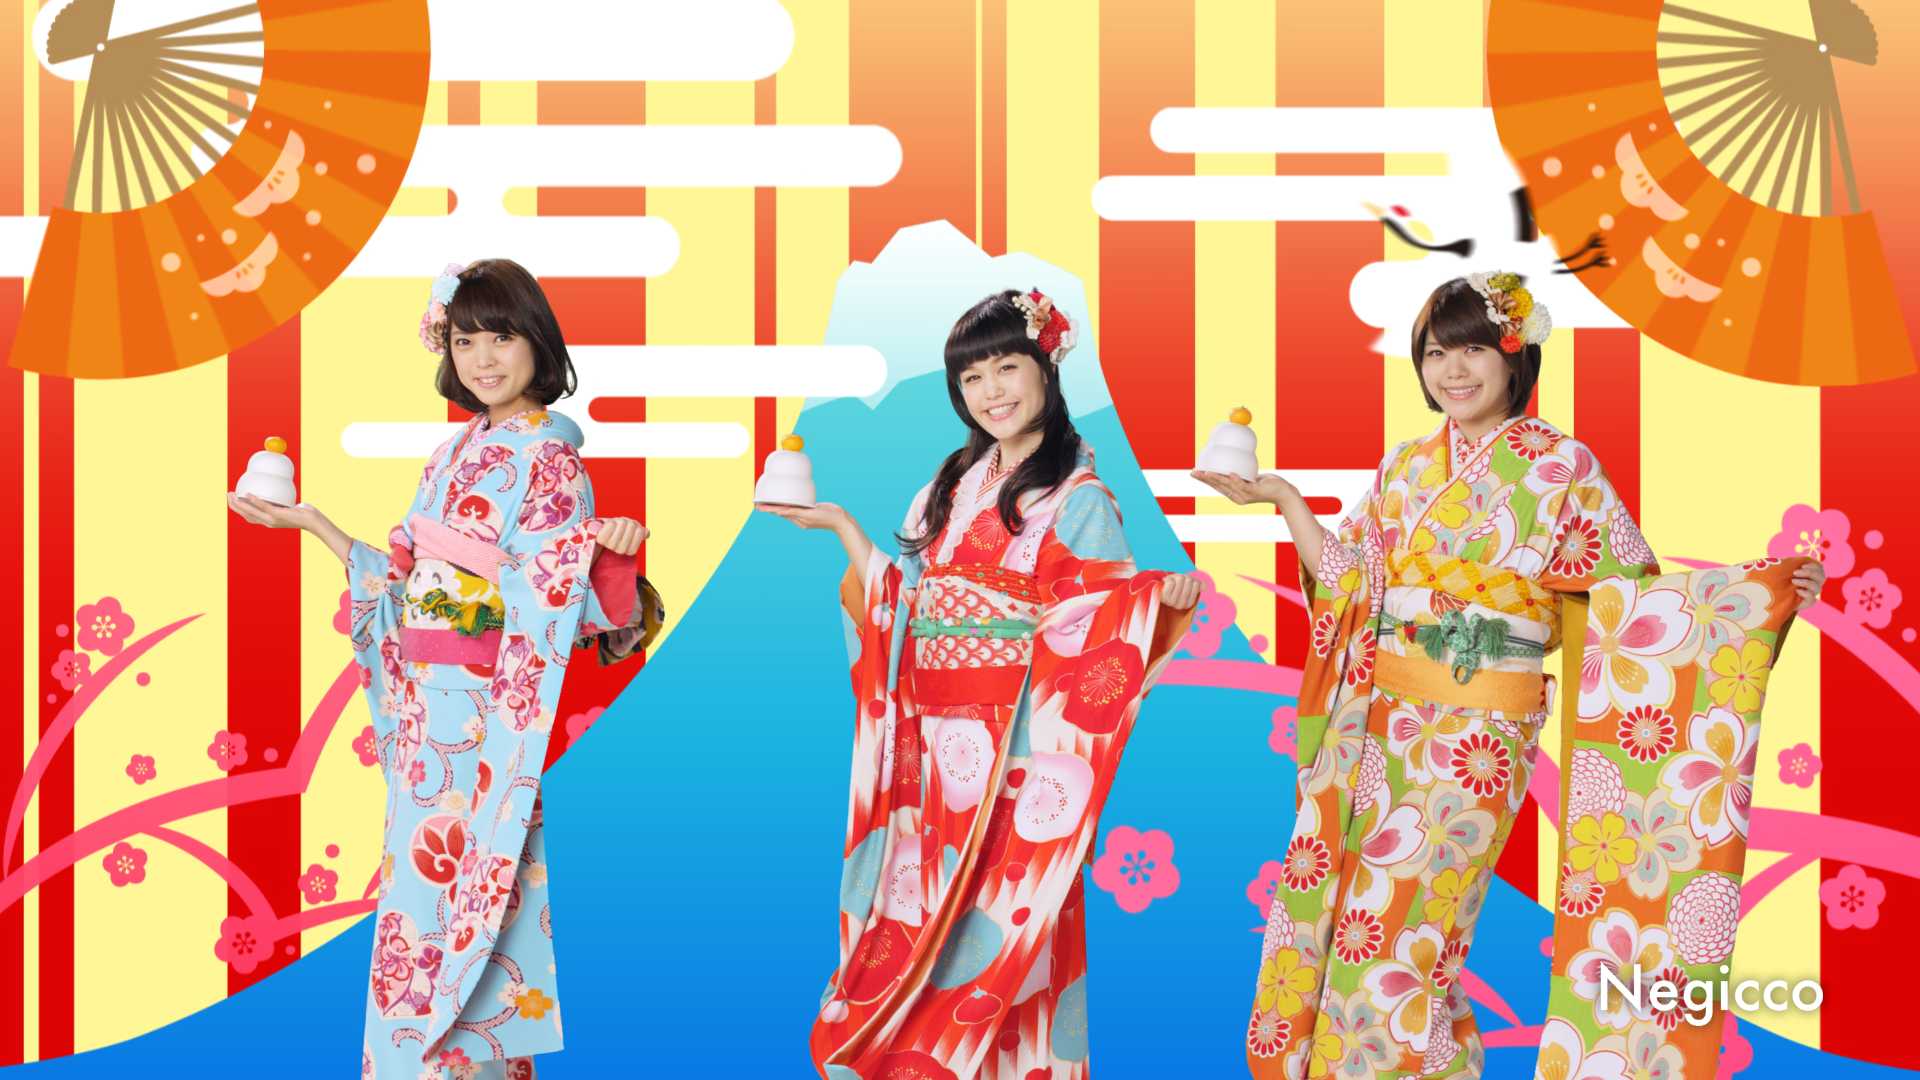 Negicco Appears in the New Commercial for Kagami Mochi – An Essential Item for the New Year in Japan!